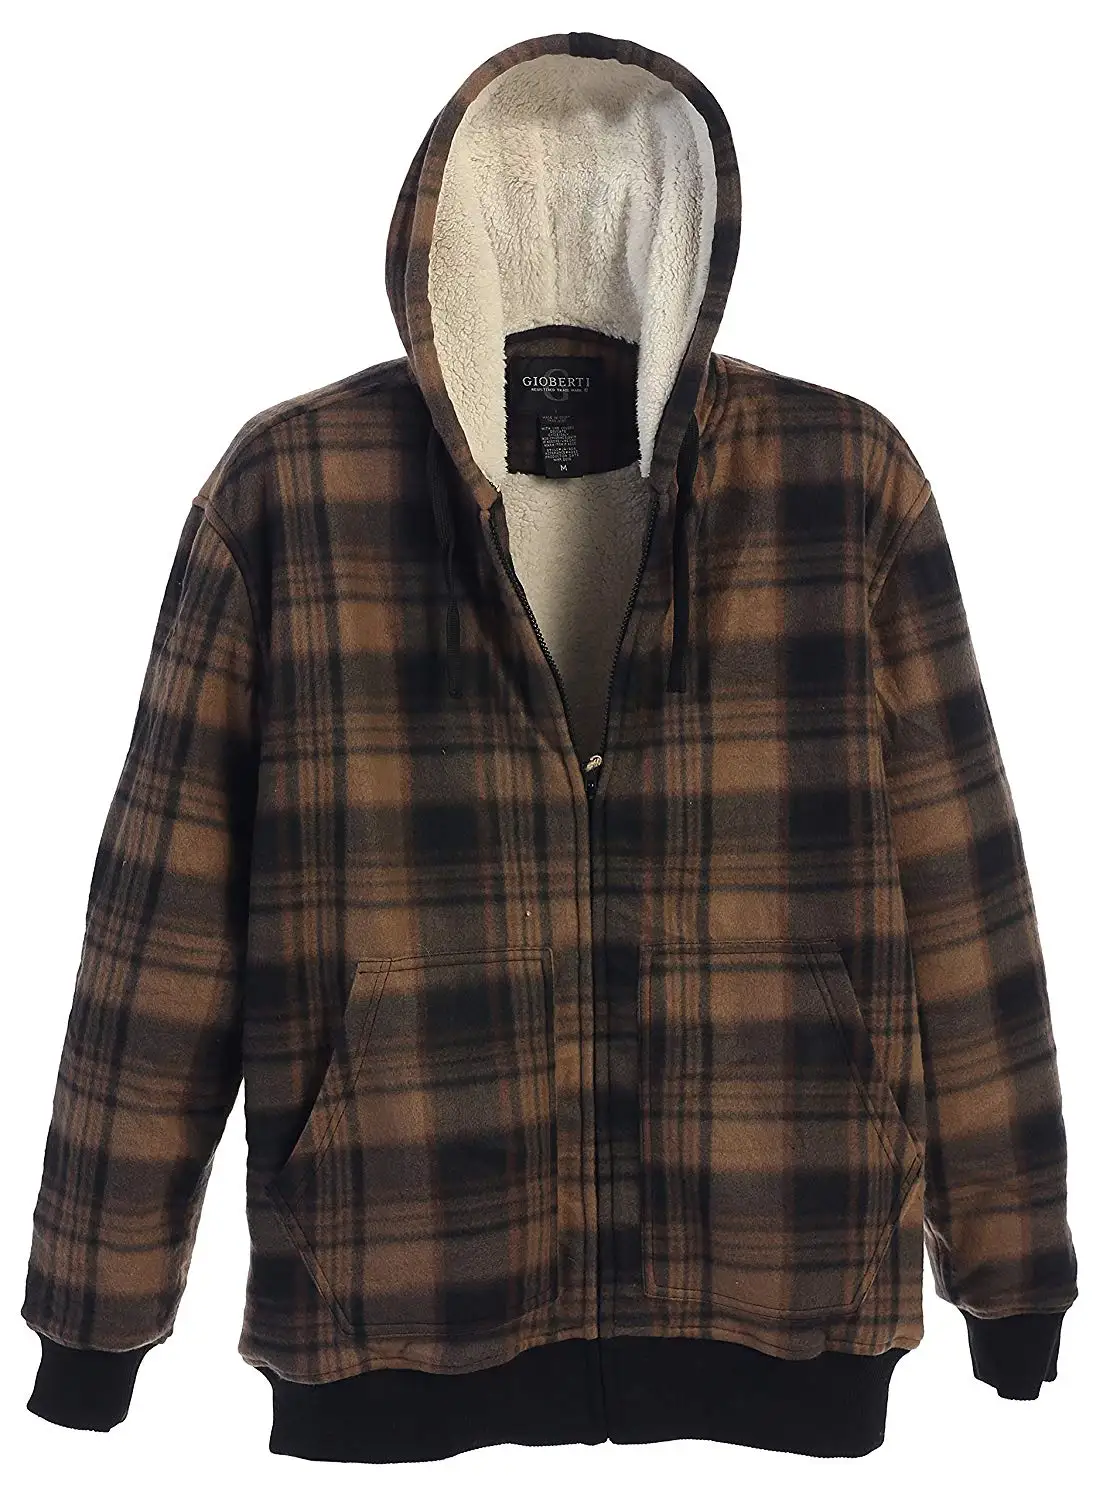 Cheap Checkered Hoodie, find Checkered Hoodie deals on line at Alibaba.com